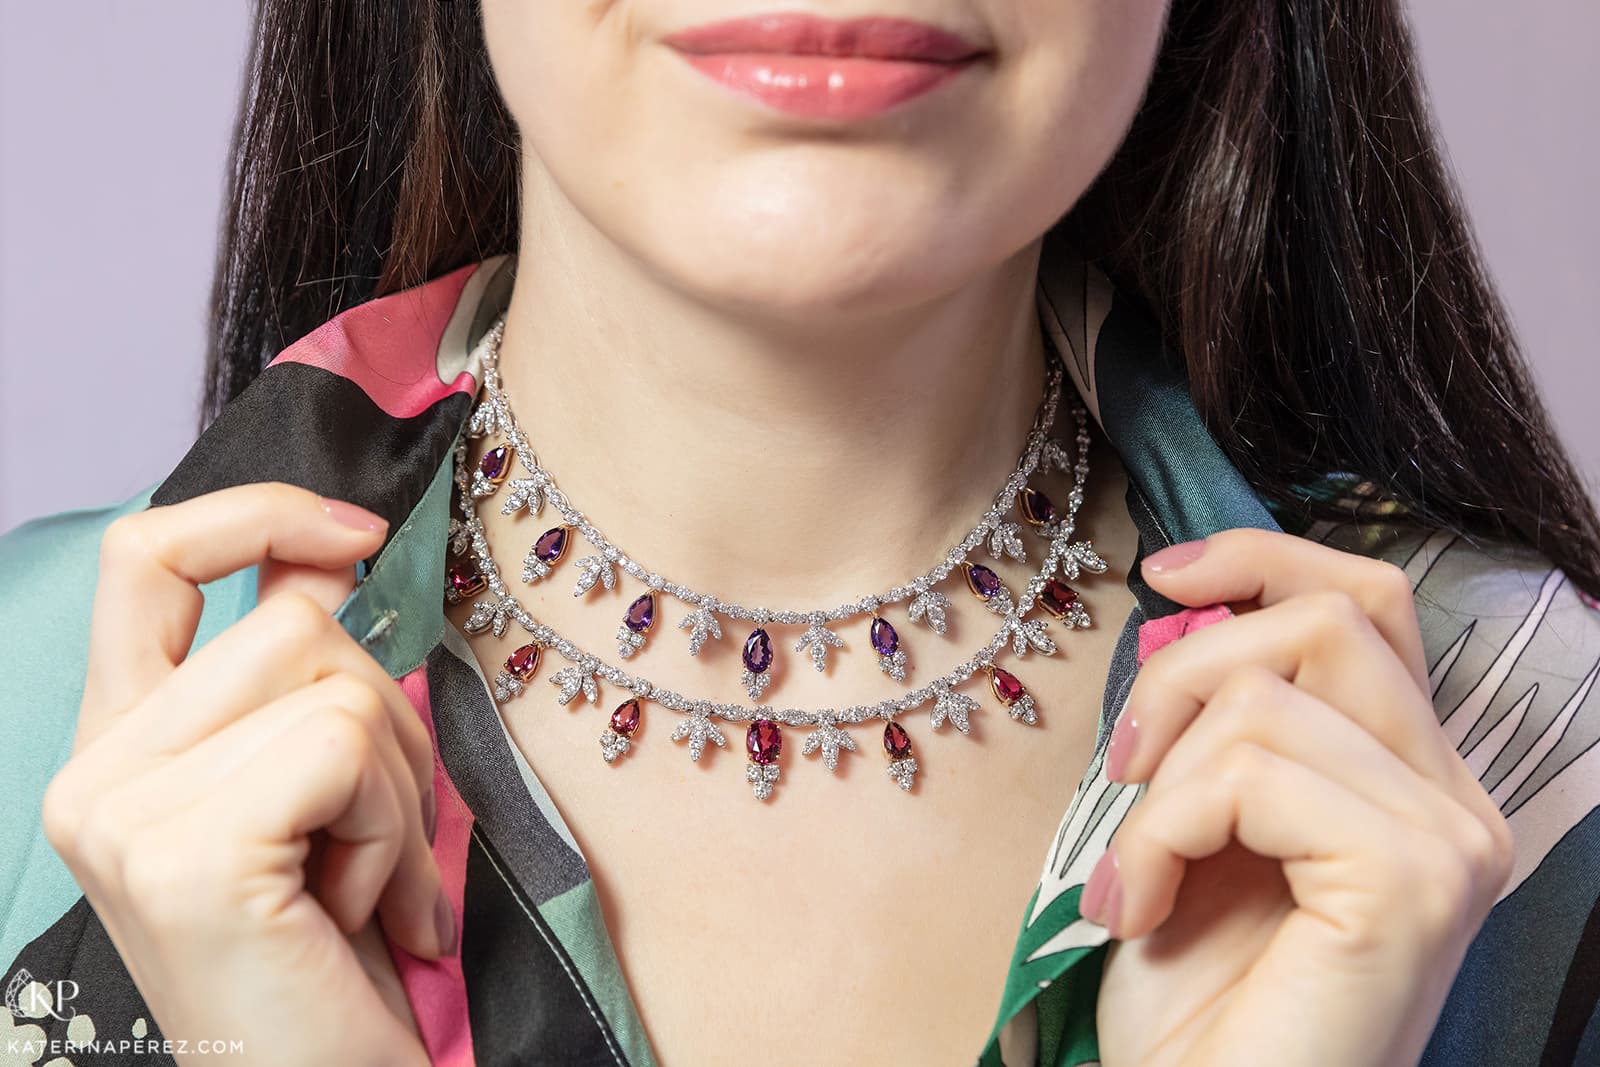 Luca Carati necklaces with tourmalines, amethysts and diamonds. Photo by Simon Martner